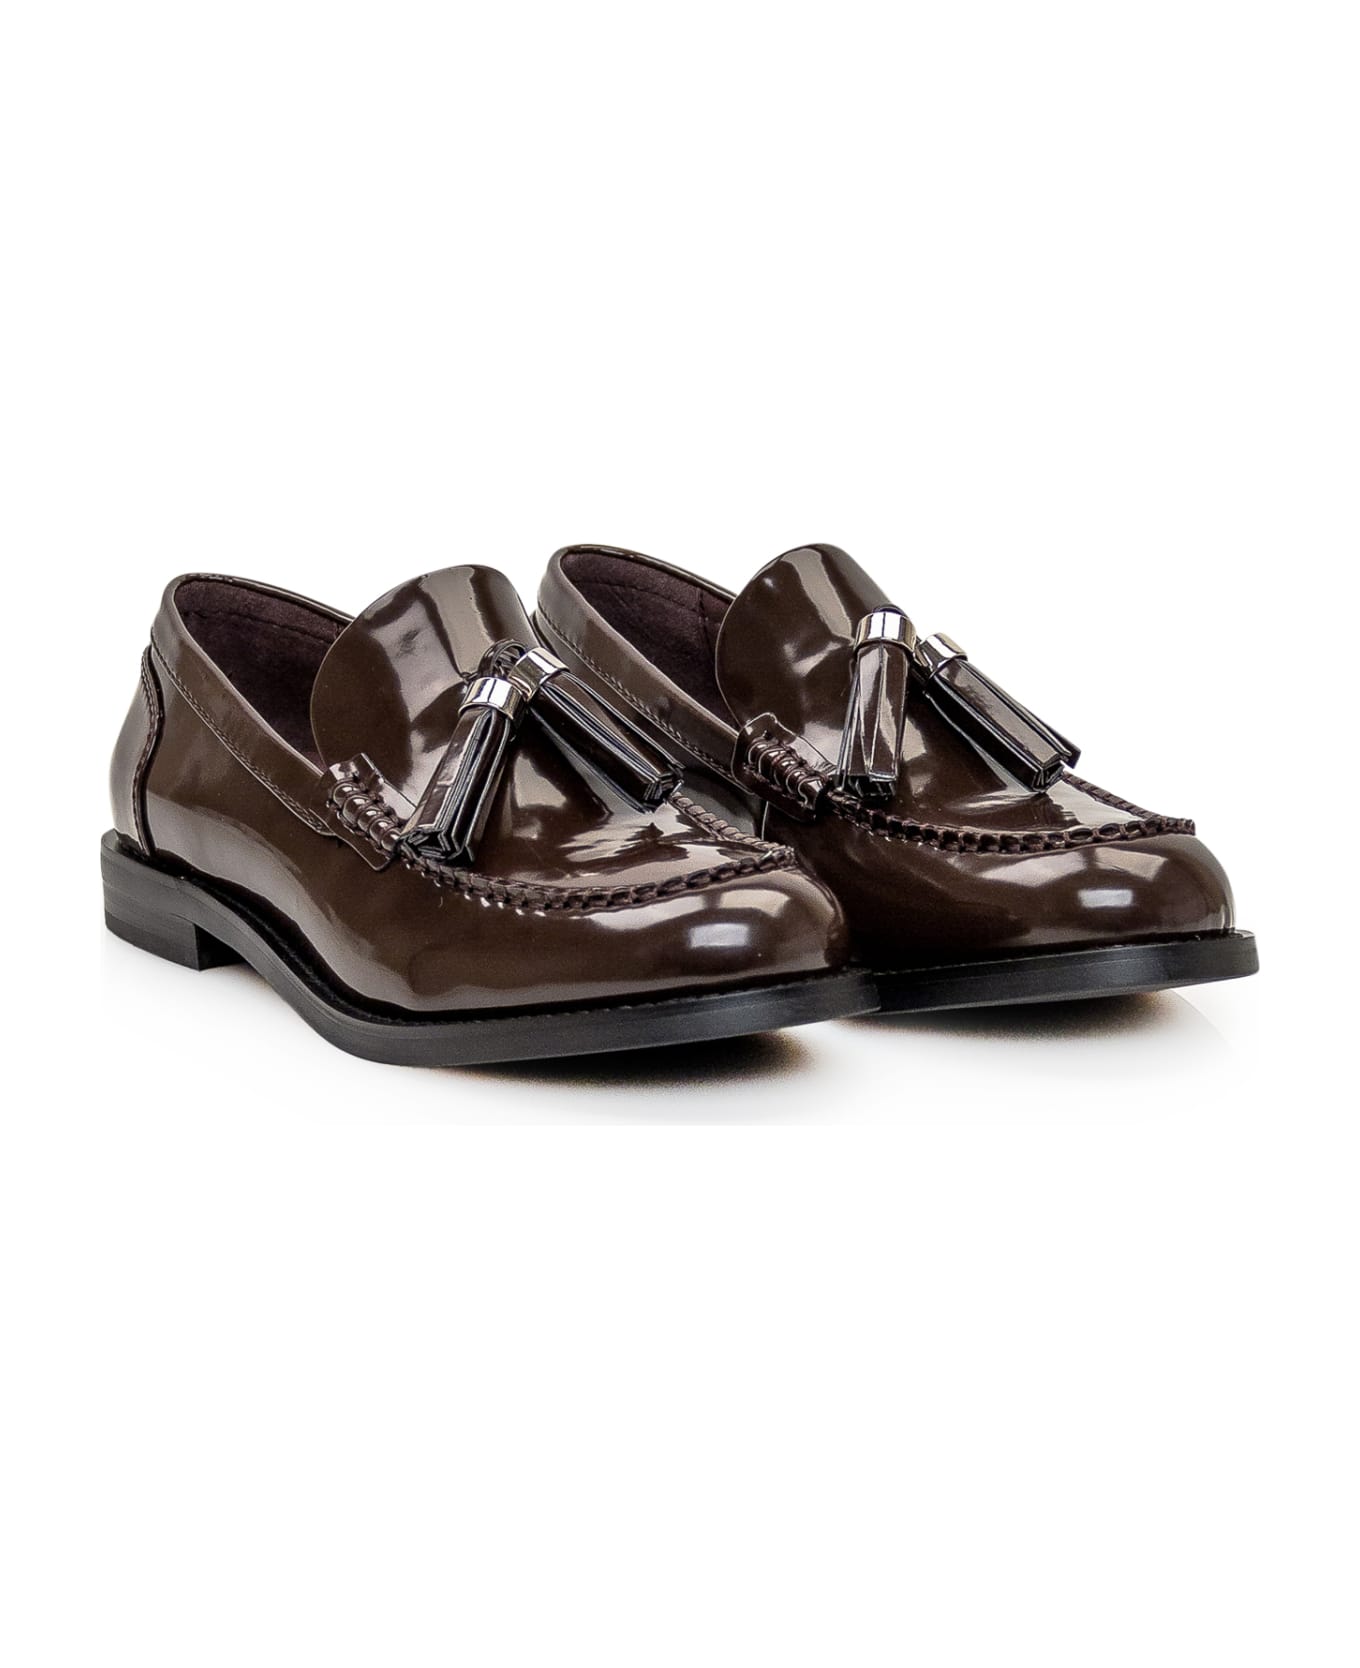 Jeffrey Campbell Lecture Loafer - BROWN